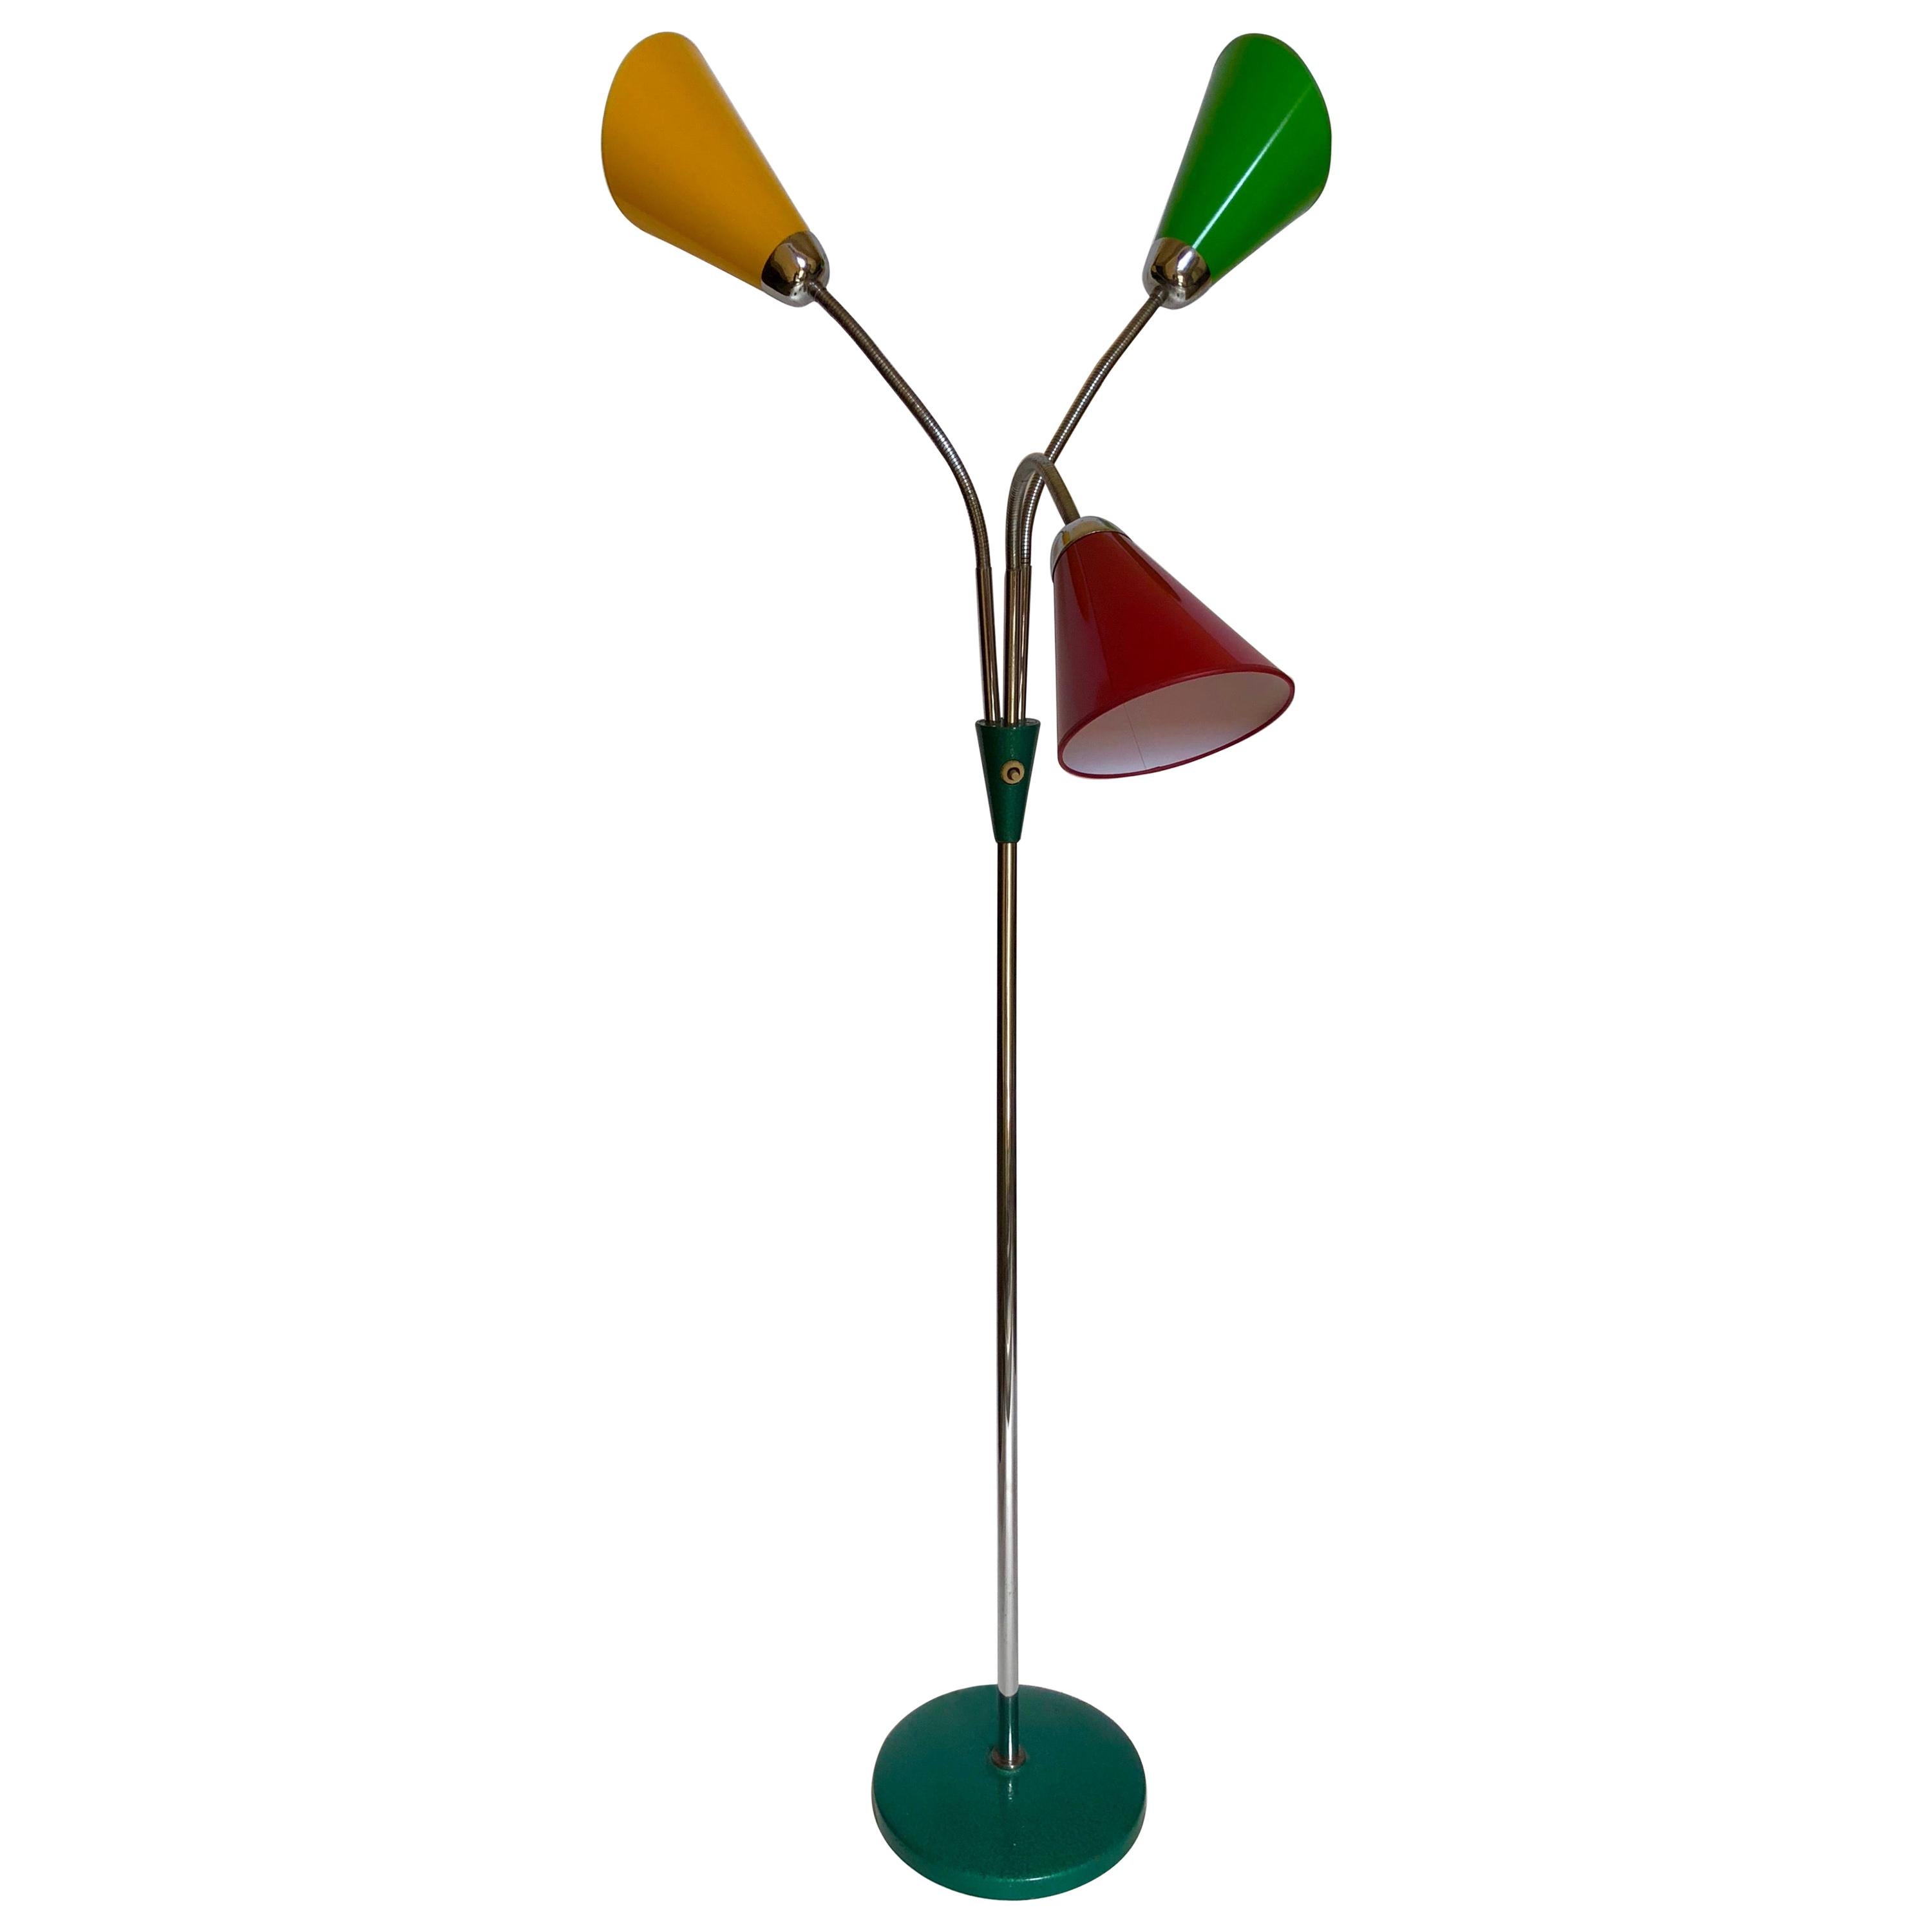 Midcentury Floor Lamp with 3 Shades in Yellow, Green and Red